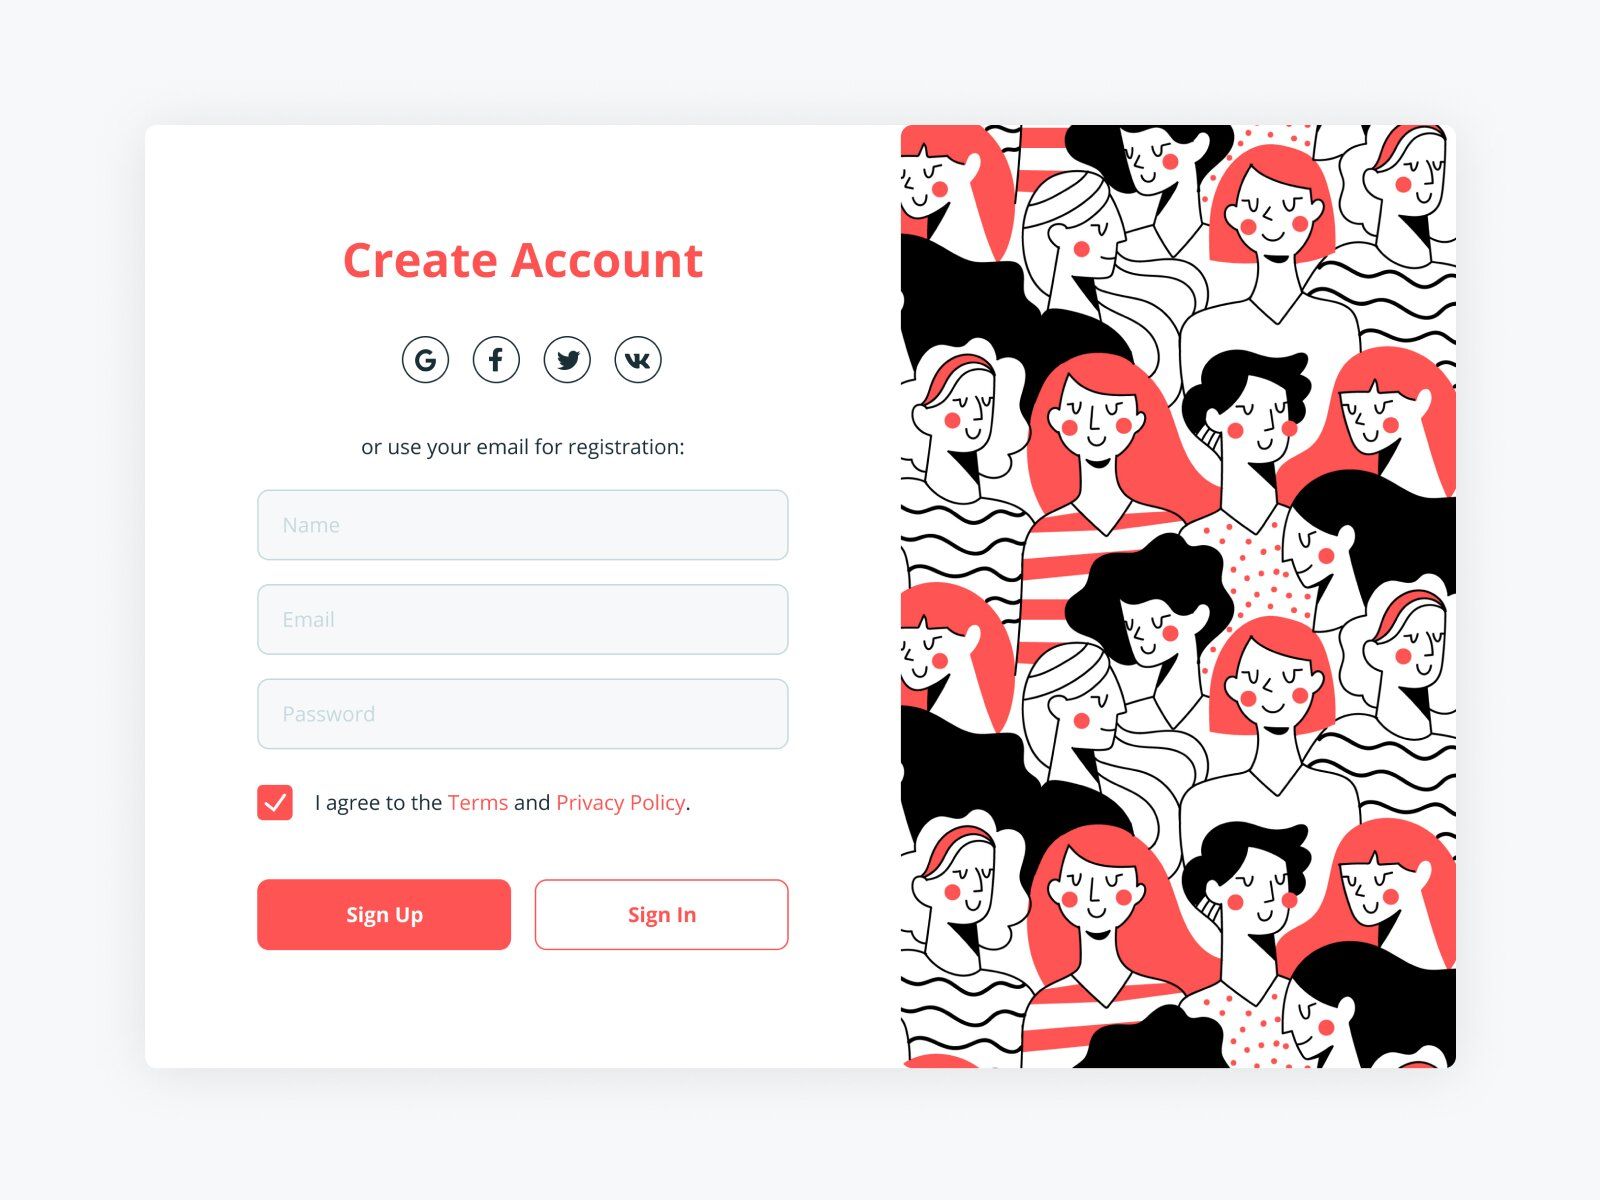 Simple Sign Up to create a marketplace website (*image by [Natalia K](https://cdn.dribbble.com/users/5210281/screenshots/11879454/media/e9538cd13b3ff7c2407f3e5ff299cdf8.png){ rel="nofollow" target="_blank" .default-md}*)